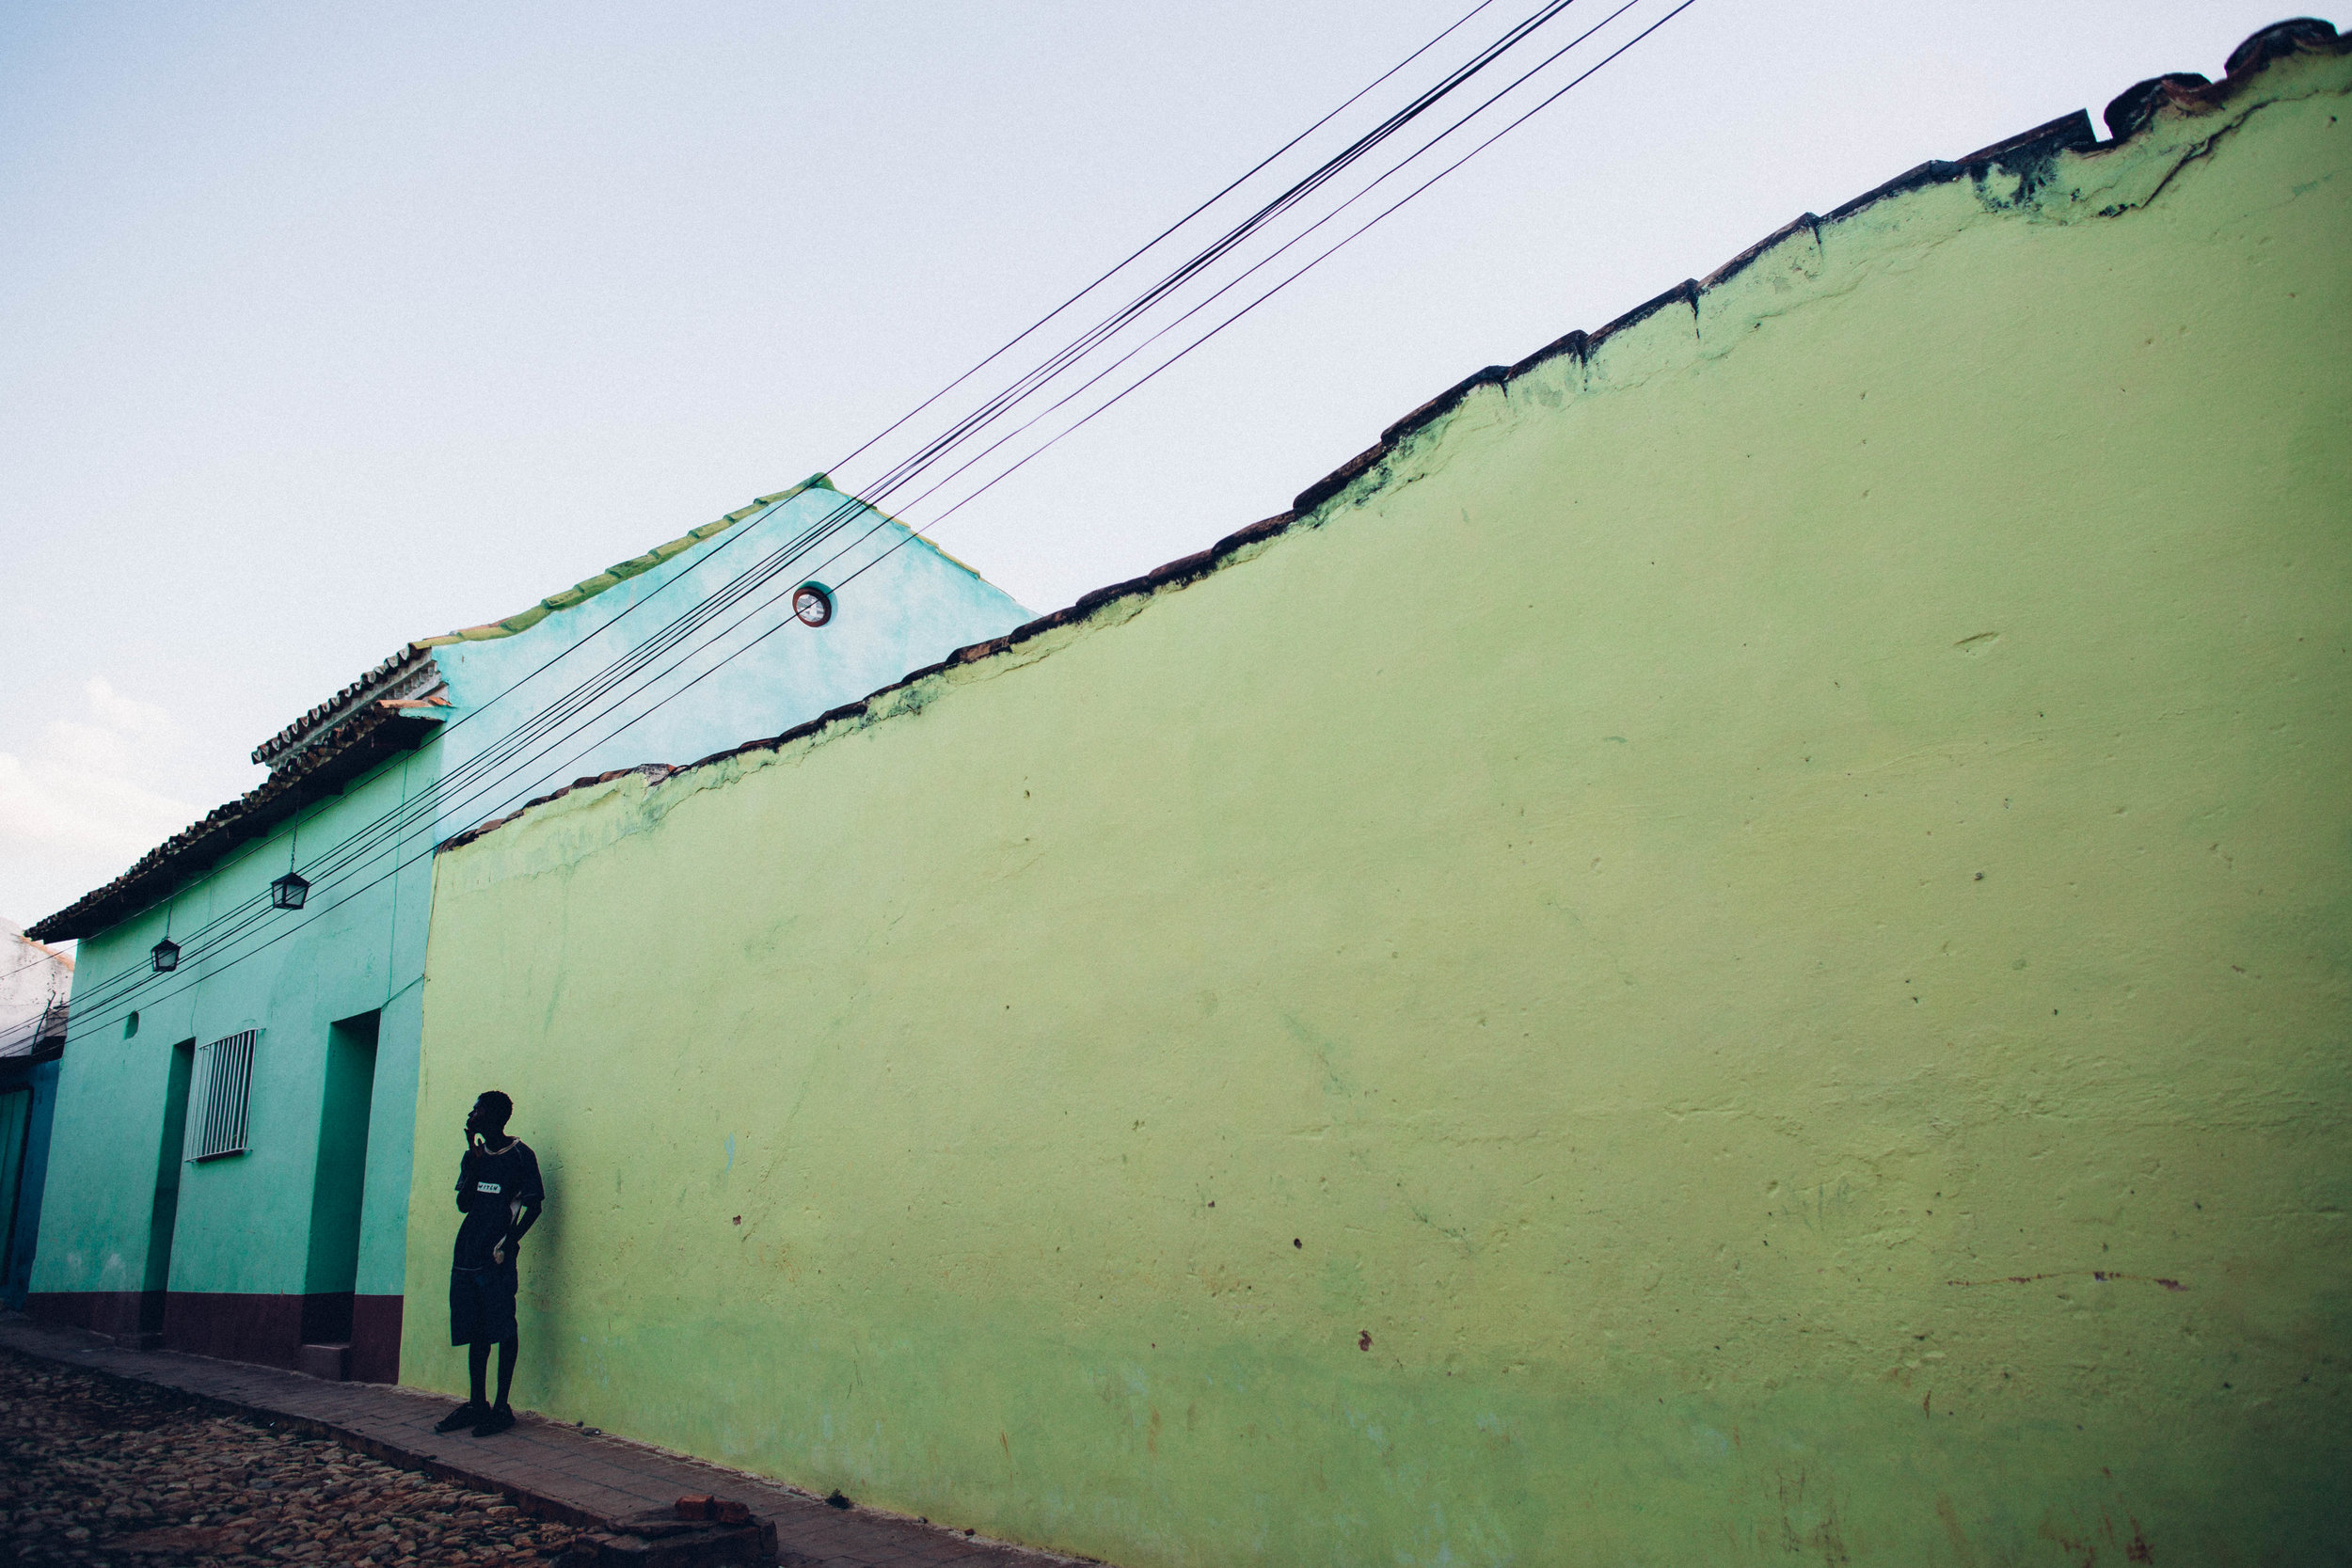   A young man deep in thought amongst the colorful houses of Trinidad. Trinidad, Cuba.  